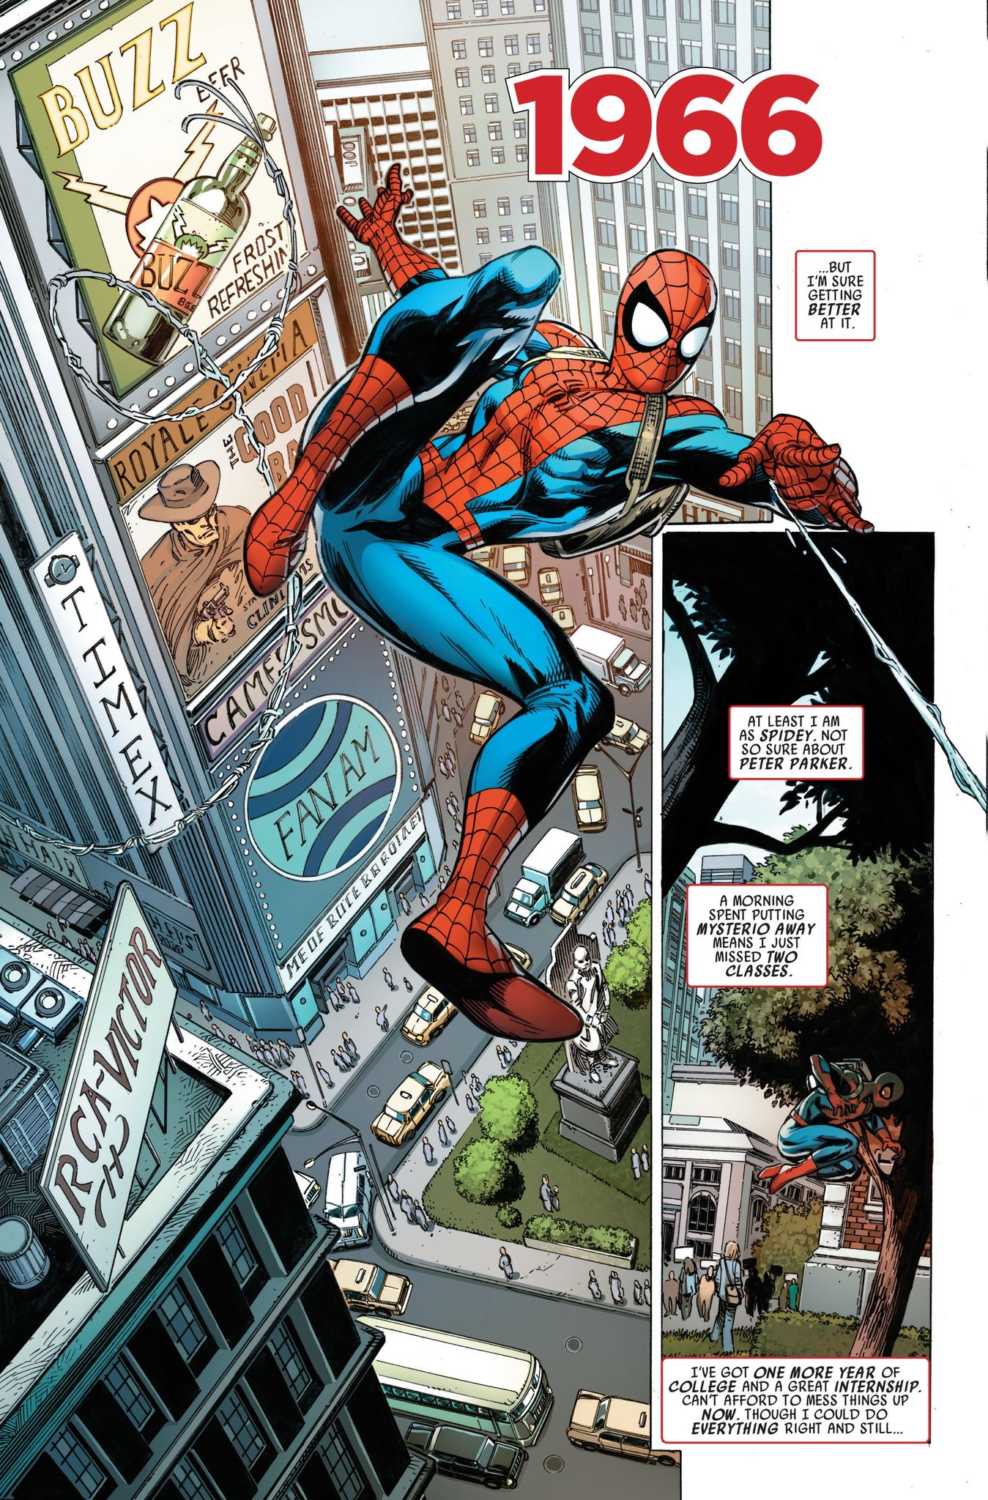 SPIDER-MAN: LIFE STORY #1 – The Conflicted 60s | Monkeys Fighting Robots